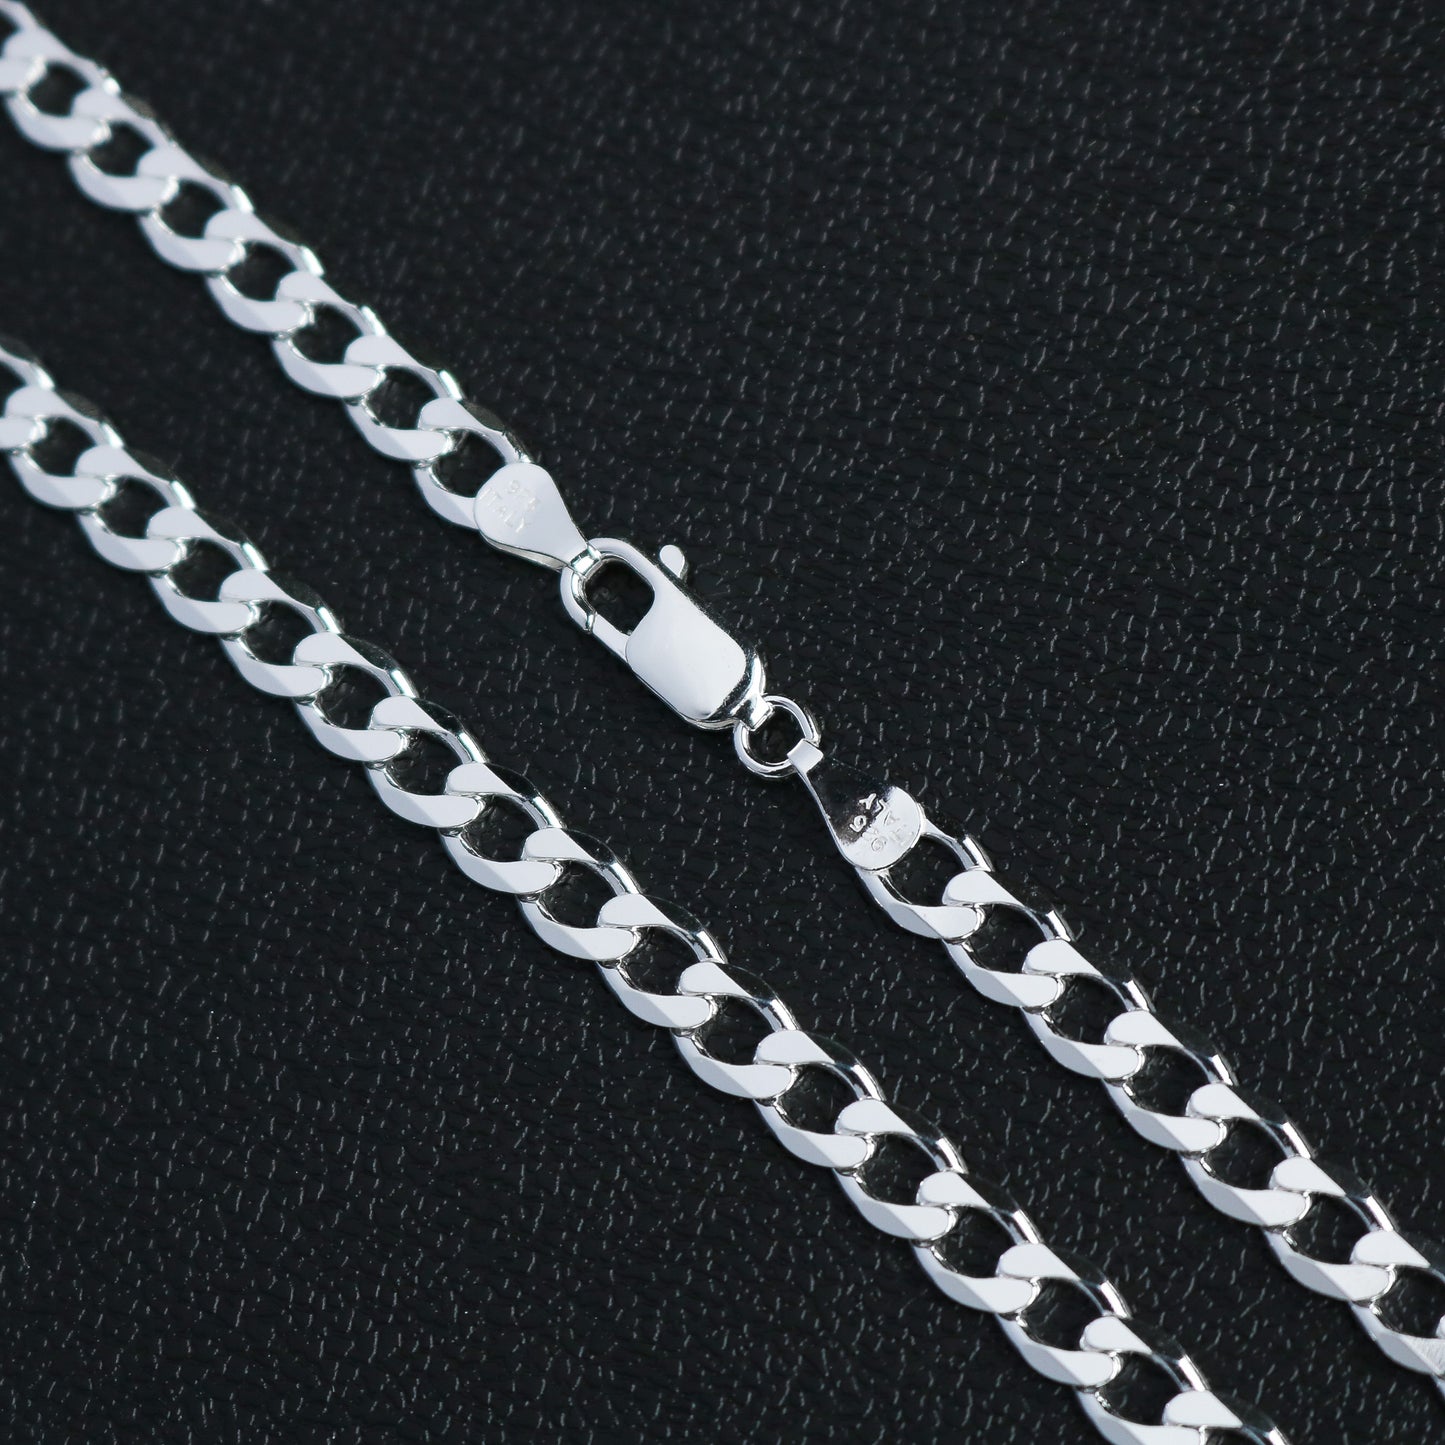 6mm Cuban Chain - Real 925 Silver